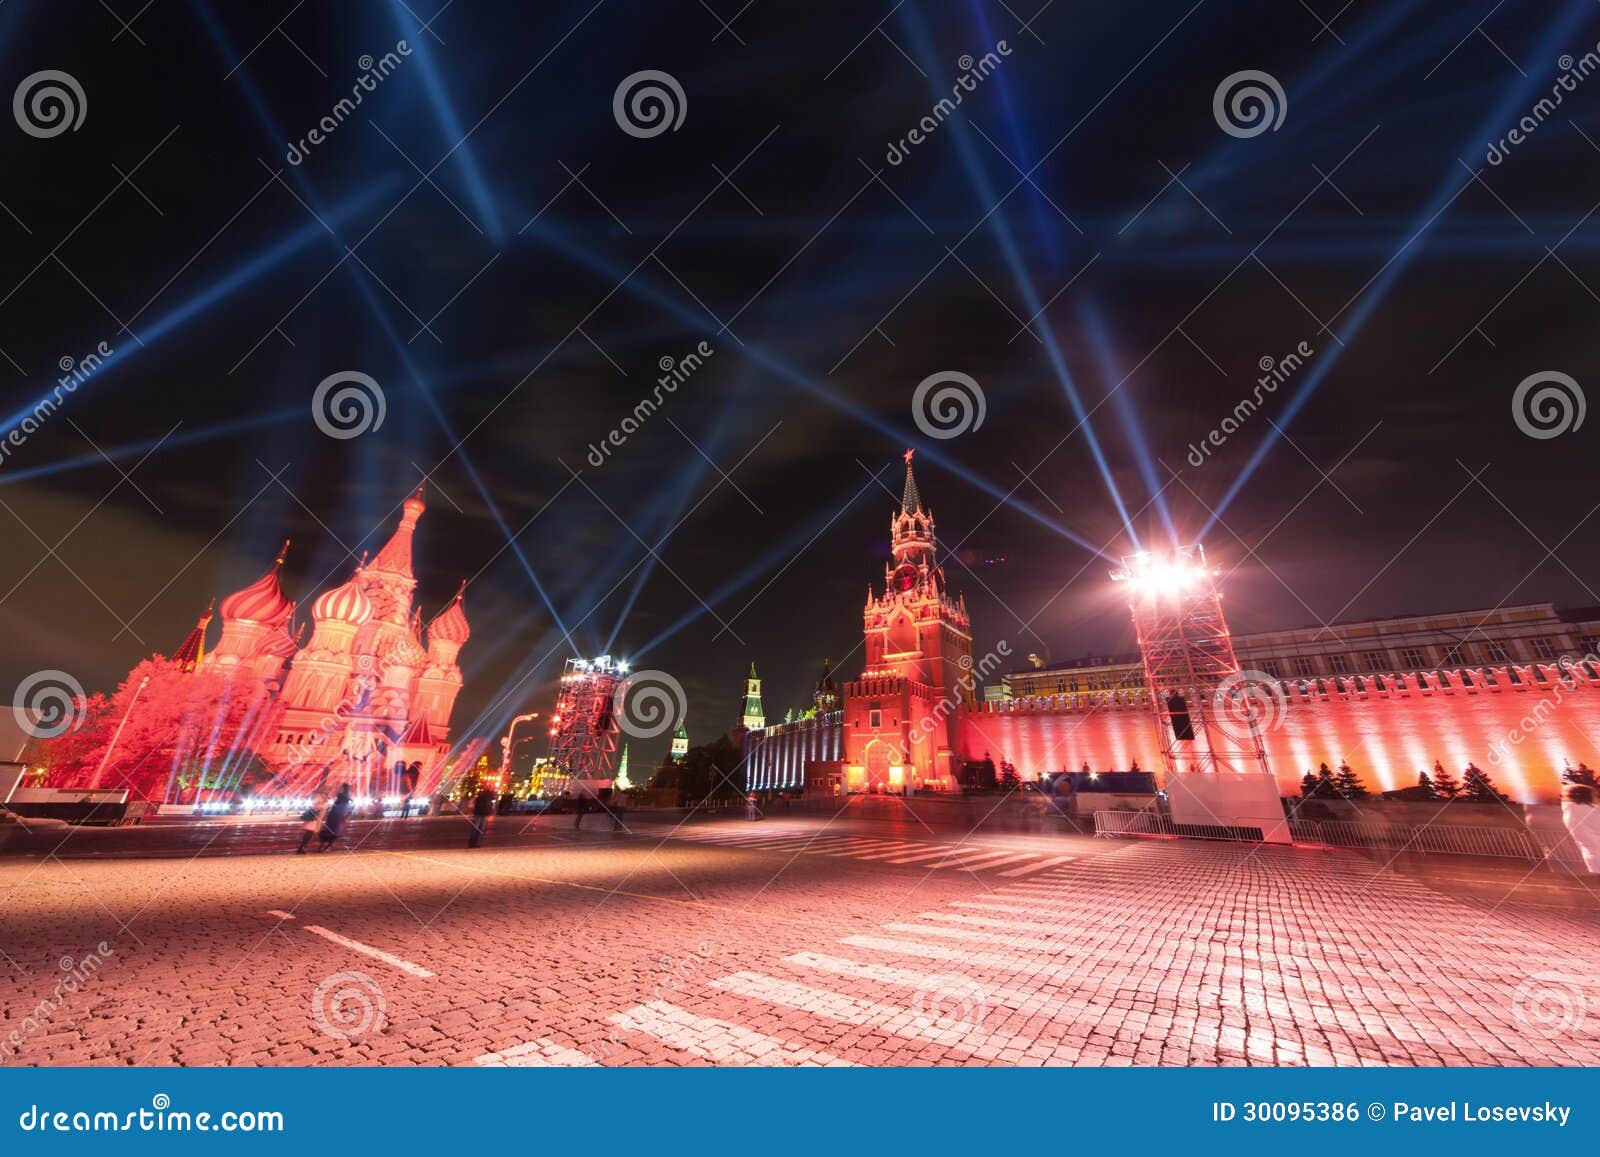 kremlin and st. basils cathedral on red square in moscow